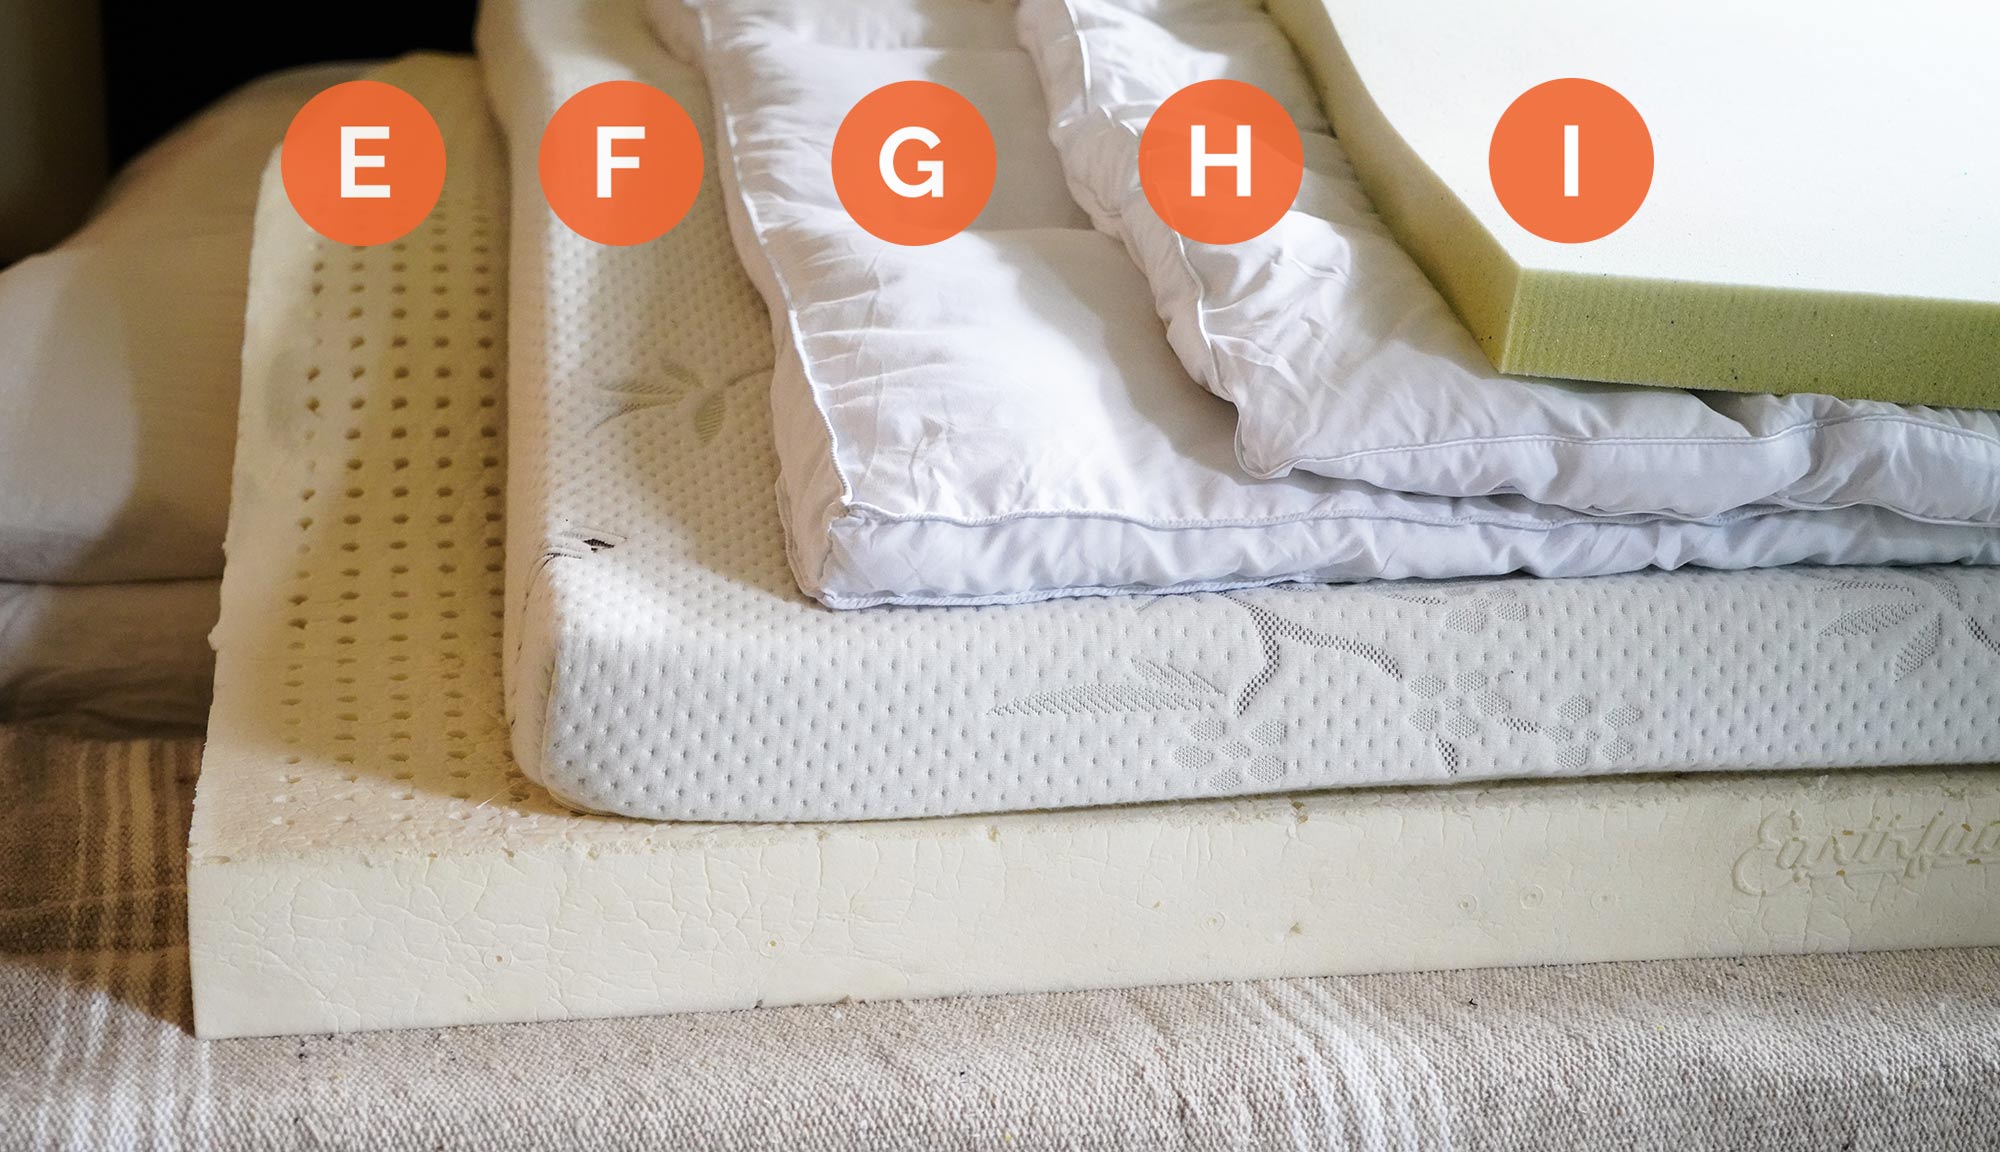 Mattress Pads vs. Mattress Toppers: What's the Difference?